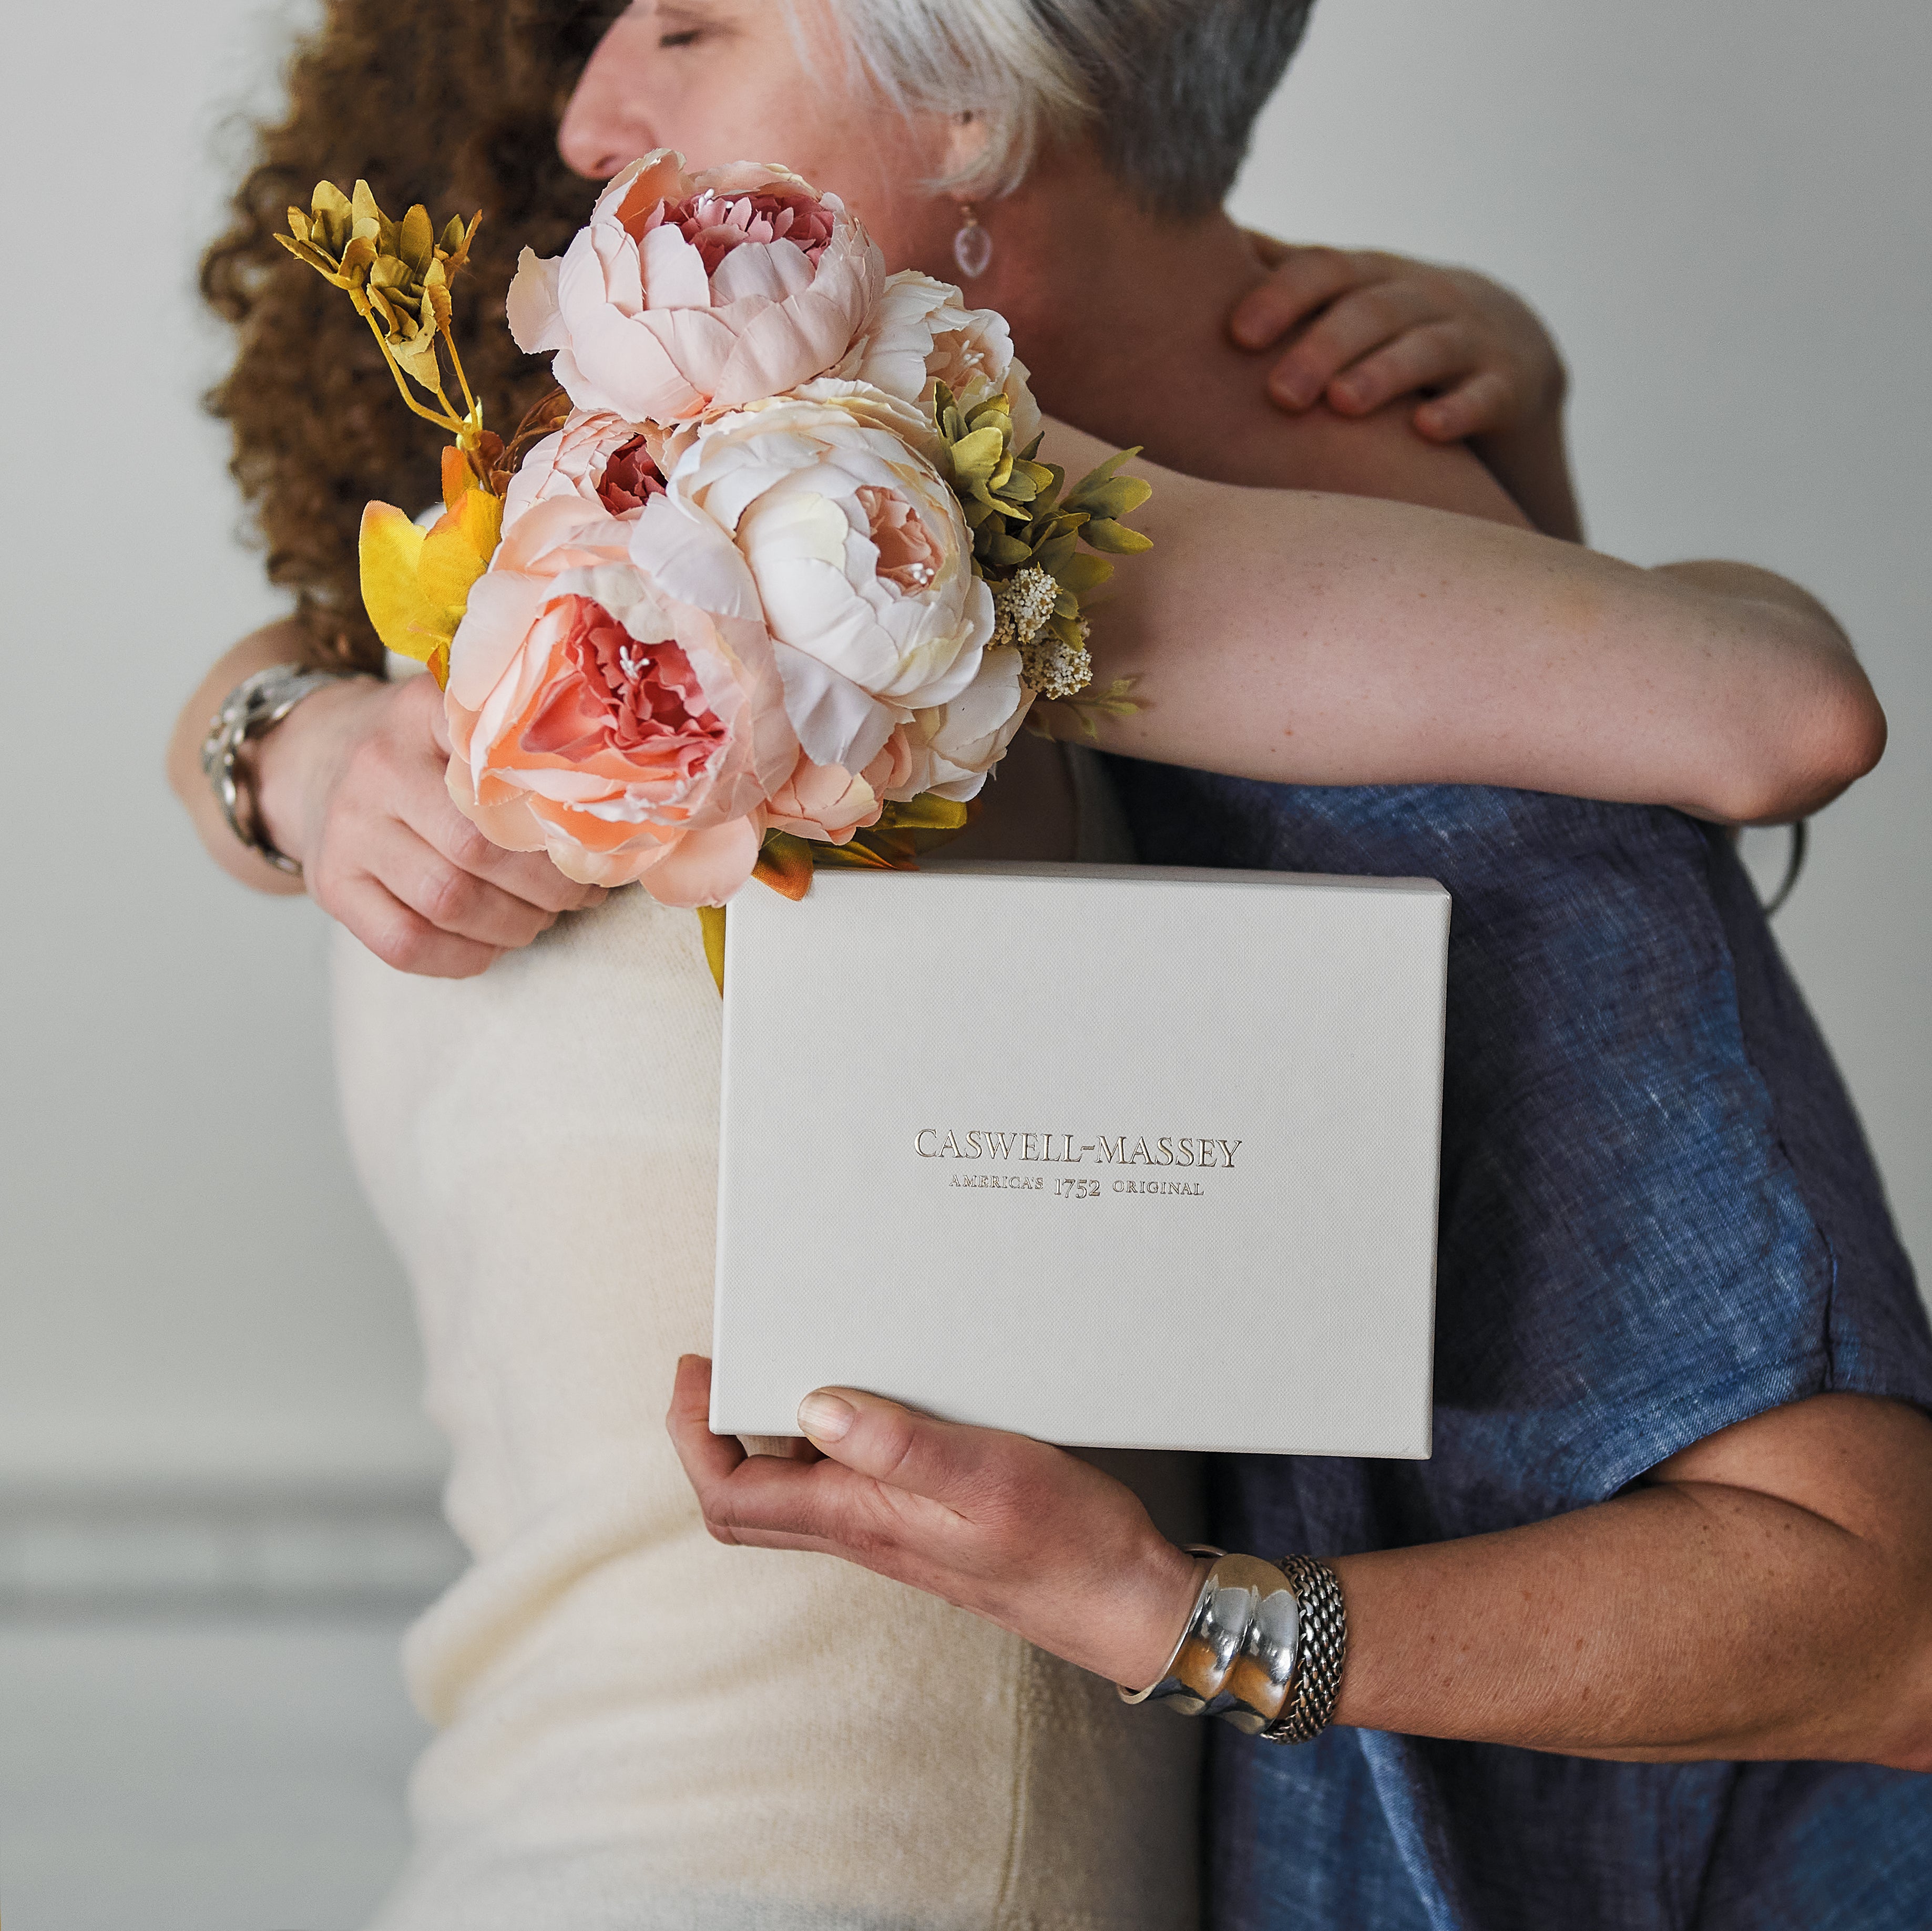 Mother hugging daughter as mother accepts Caswell-Massey Gift Set and bouquet of flowers